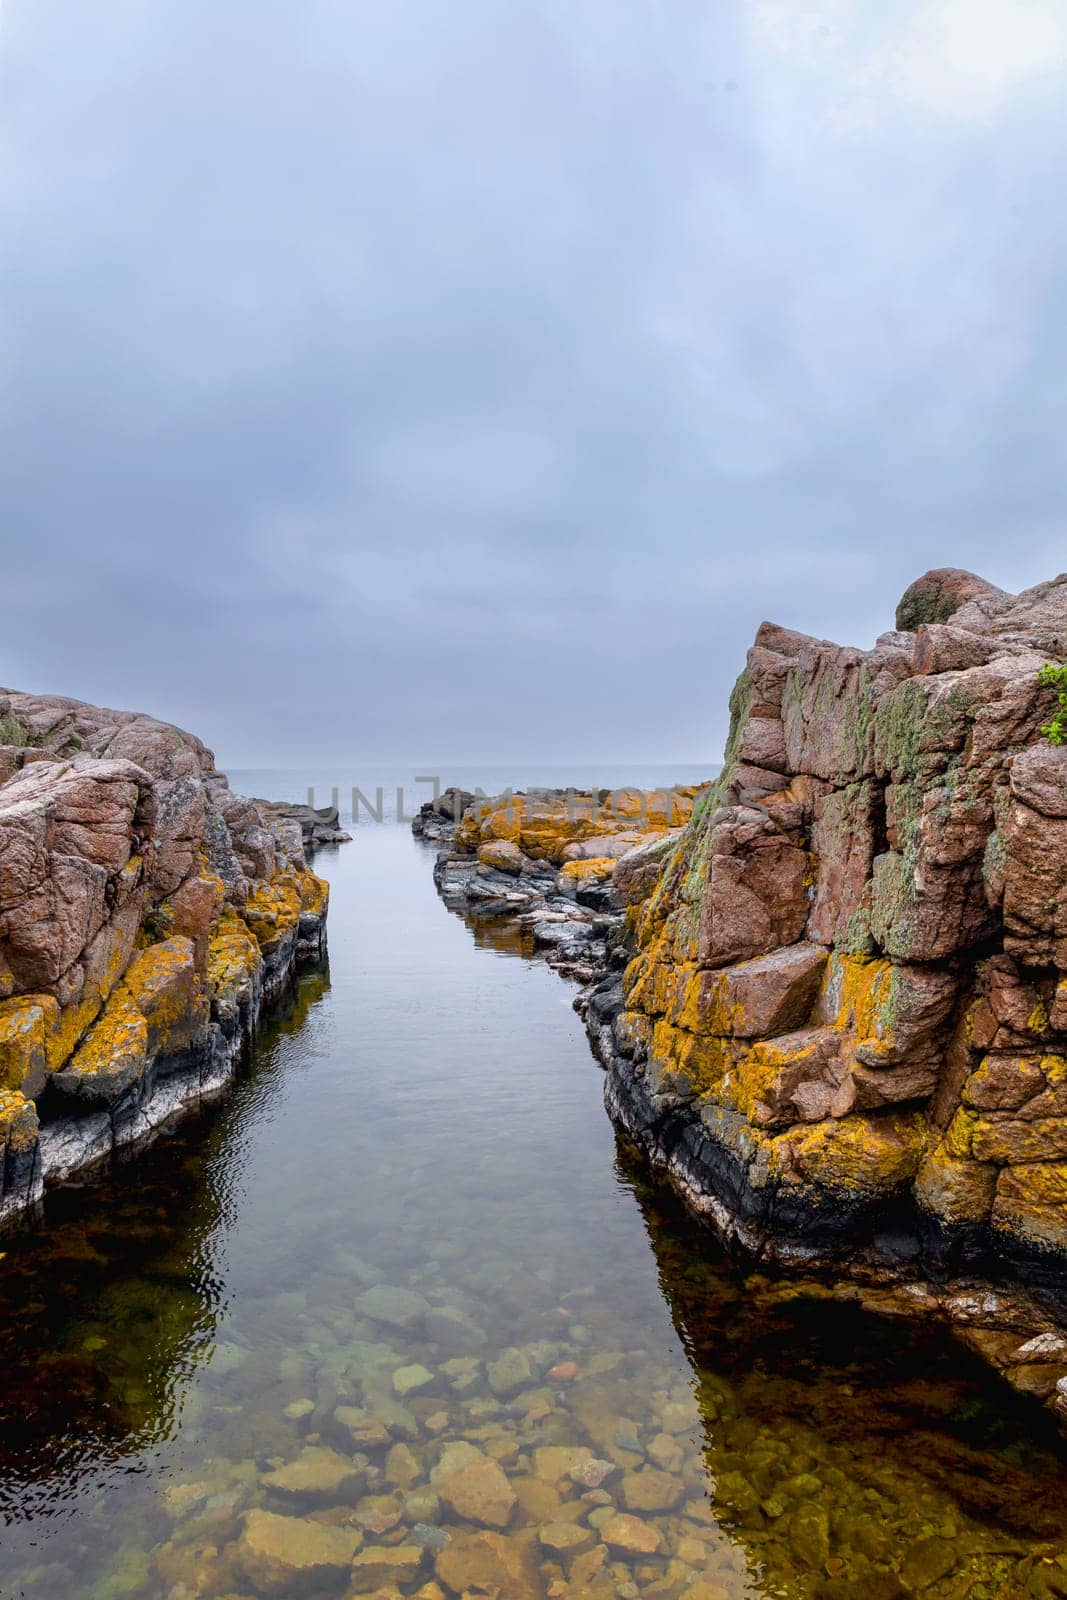 Rocky seashore. Stones covered with yellow and green moss and cloudy sky. Beautiful landscape.